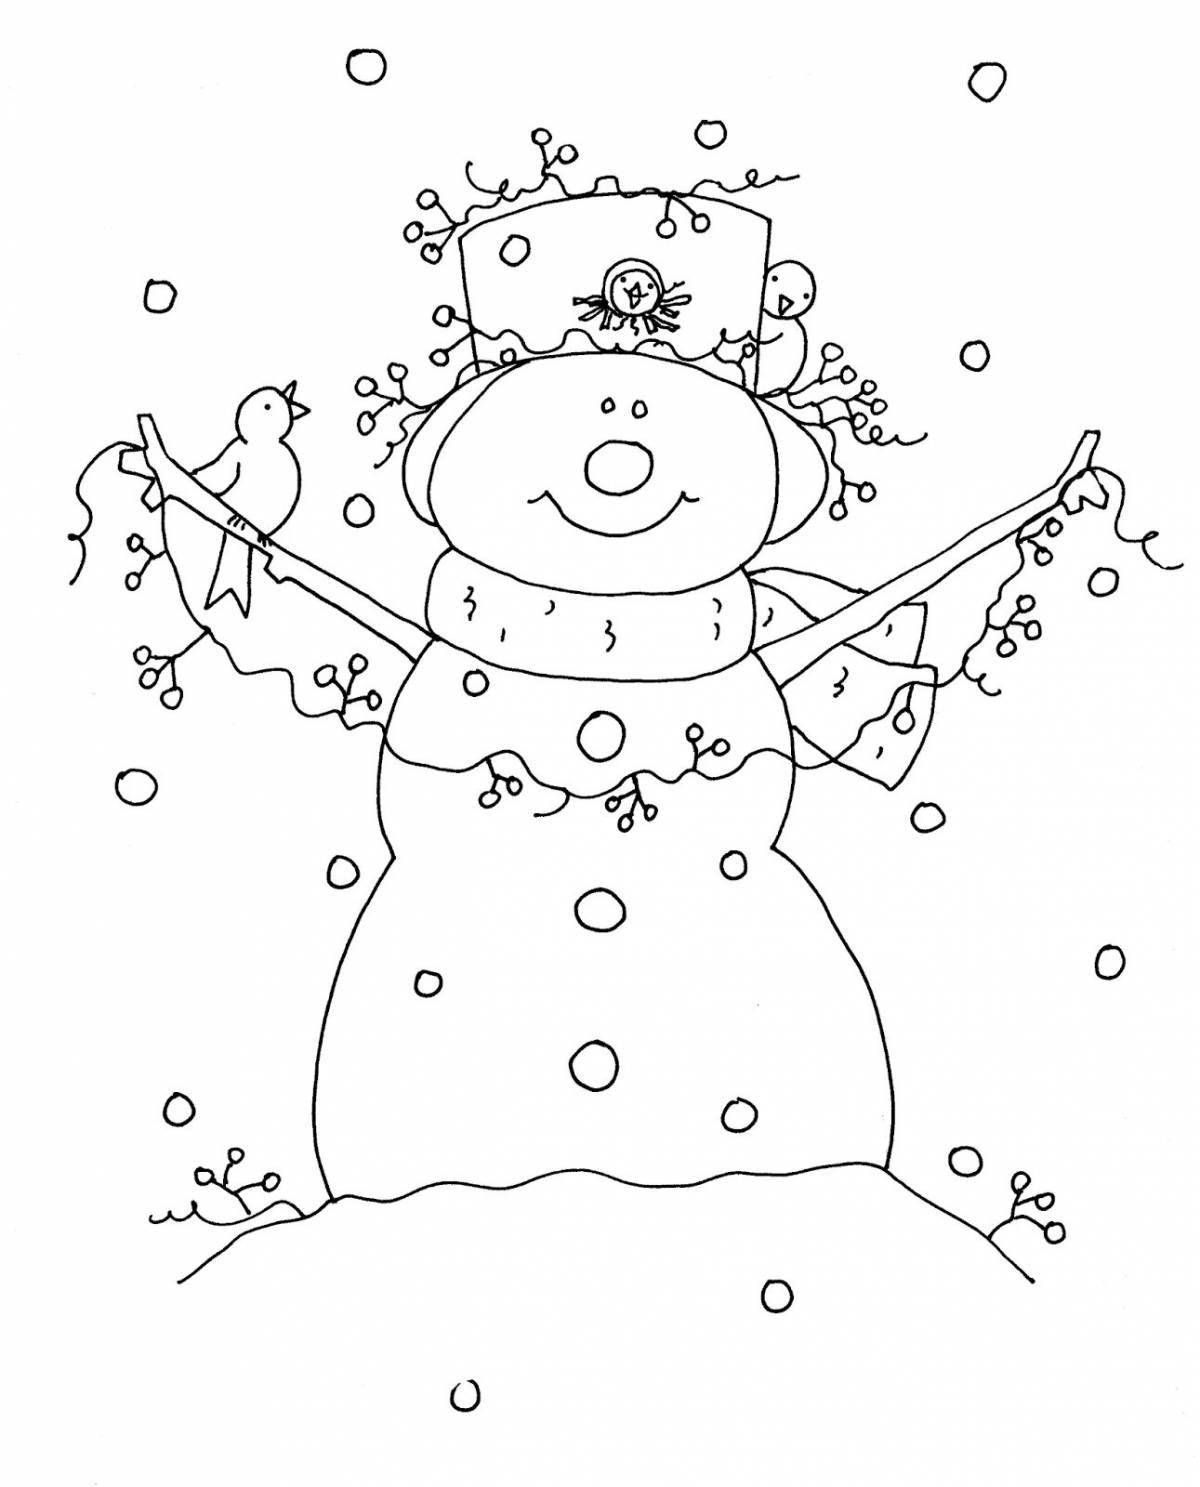 Fabulous snowman coloring by numbers